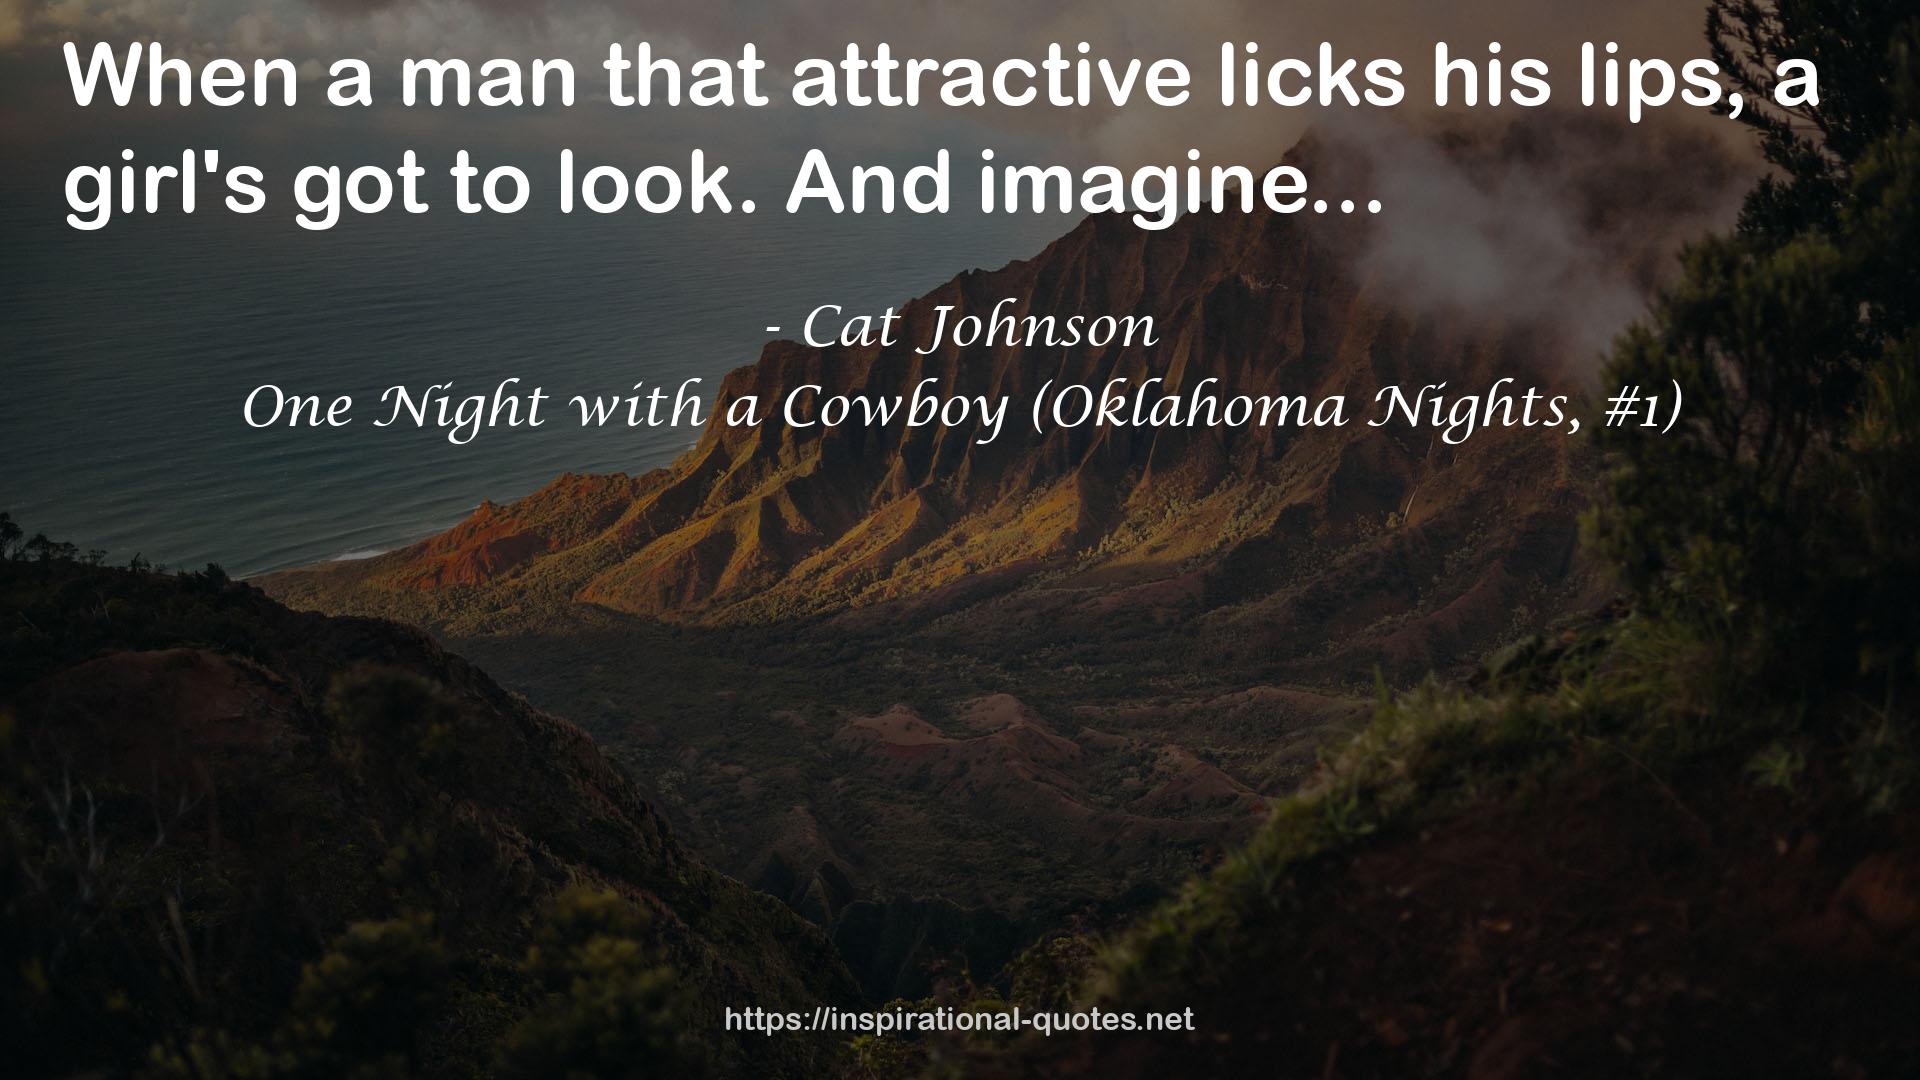 One Night with a Cowboy (Oklahoma Nights, #1) QUOTES